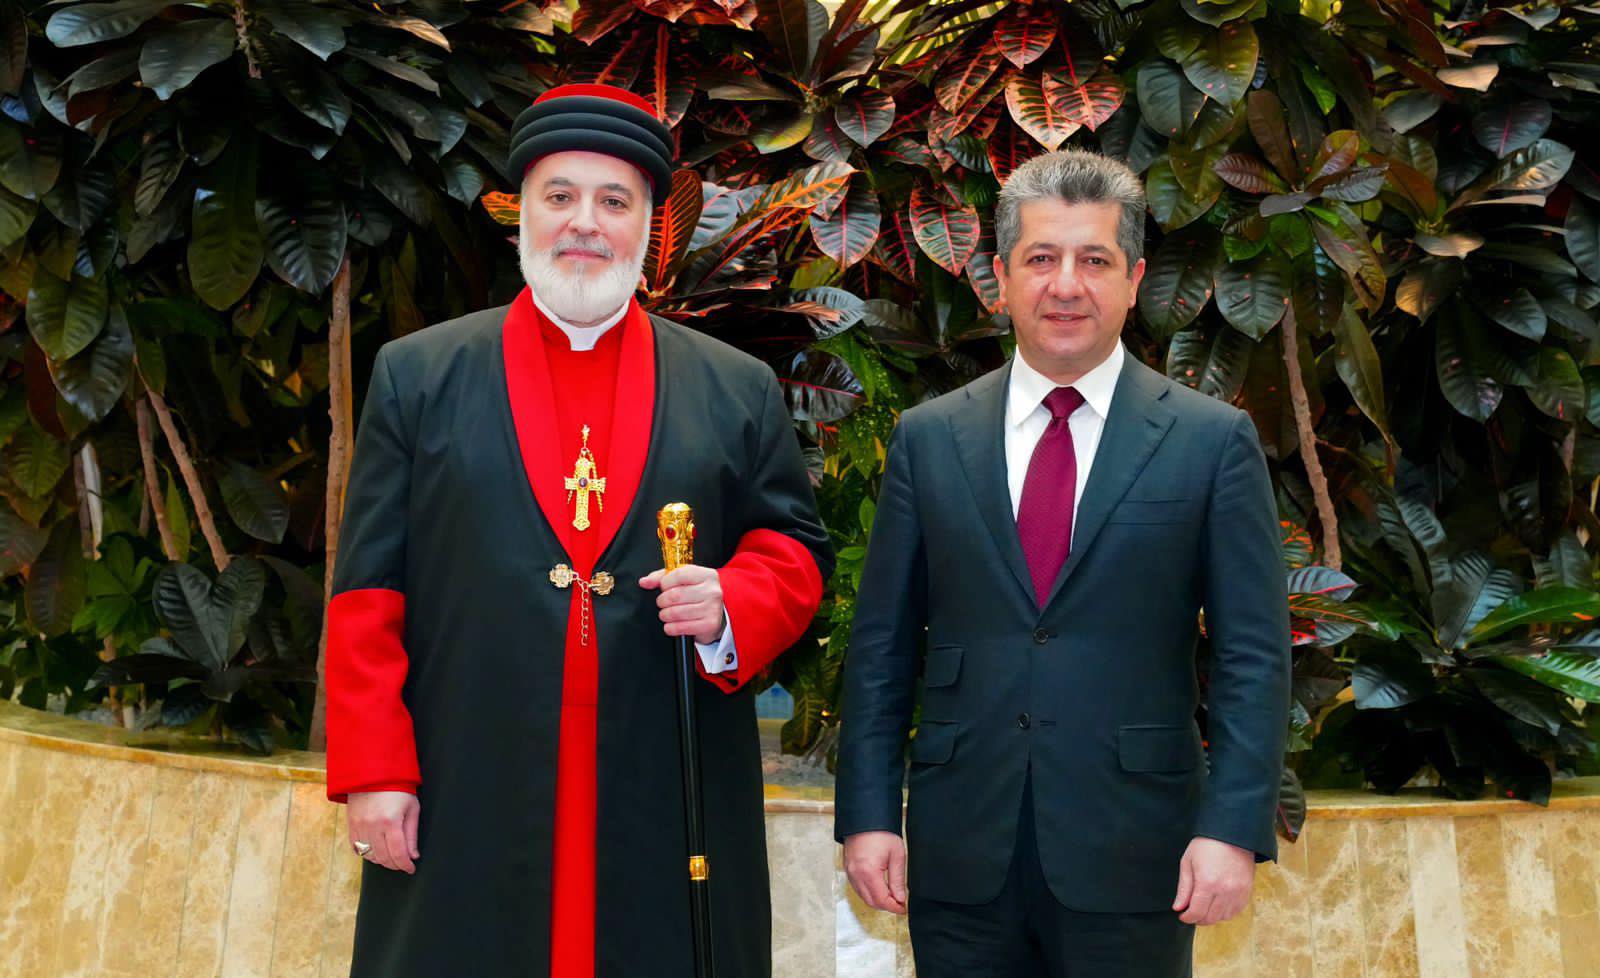 Kurdistan Region Prime Minister Masrour Barzani (R) and his holiness Mar Awa Royel, Patriarch of the Assyrian Church of the East ahead of a meeting in Erbil on Oct. 16, 2021. (Photo: PM's Office)